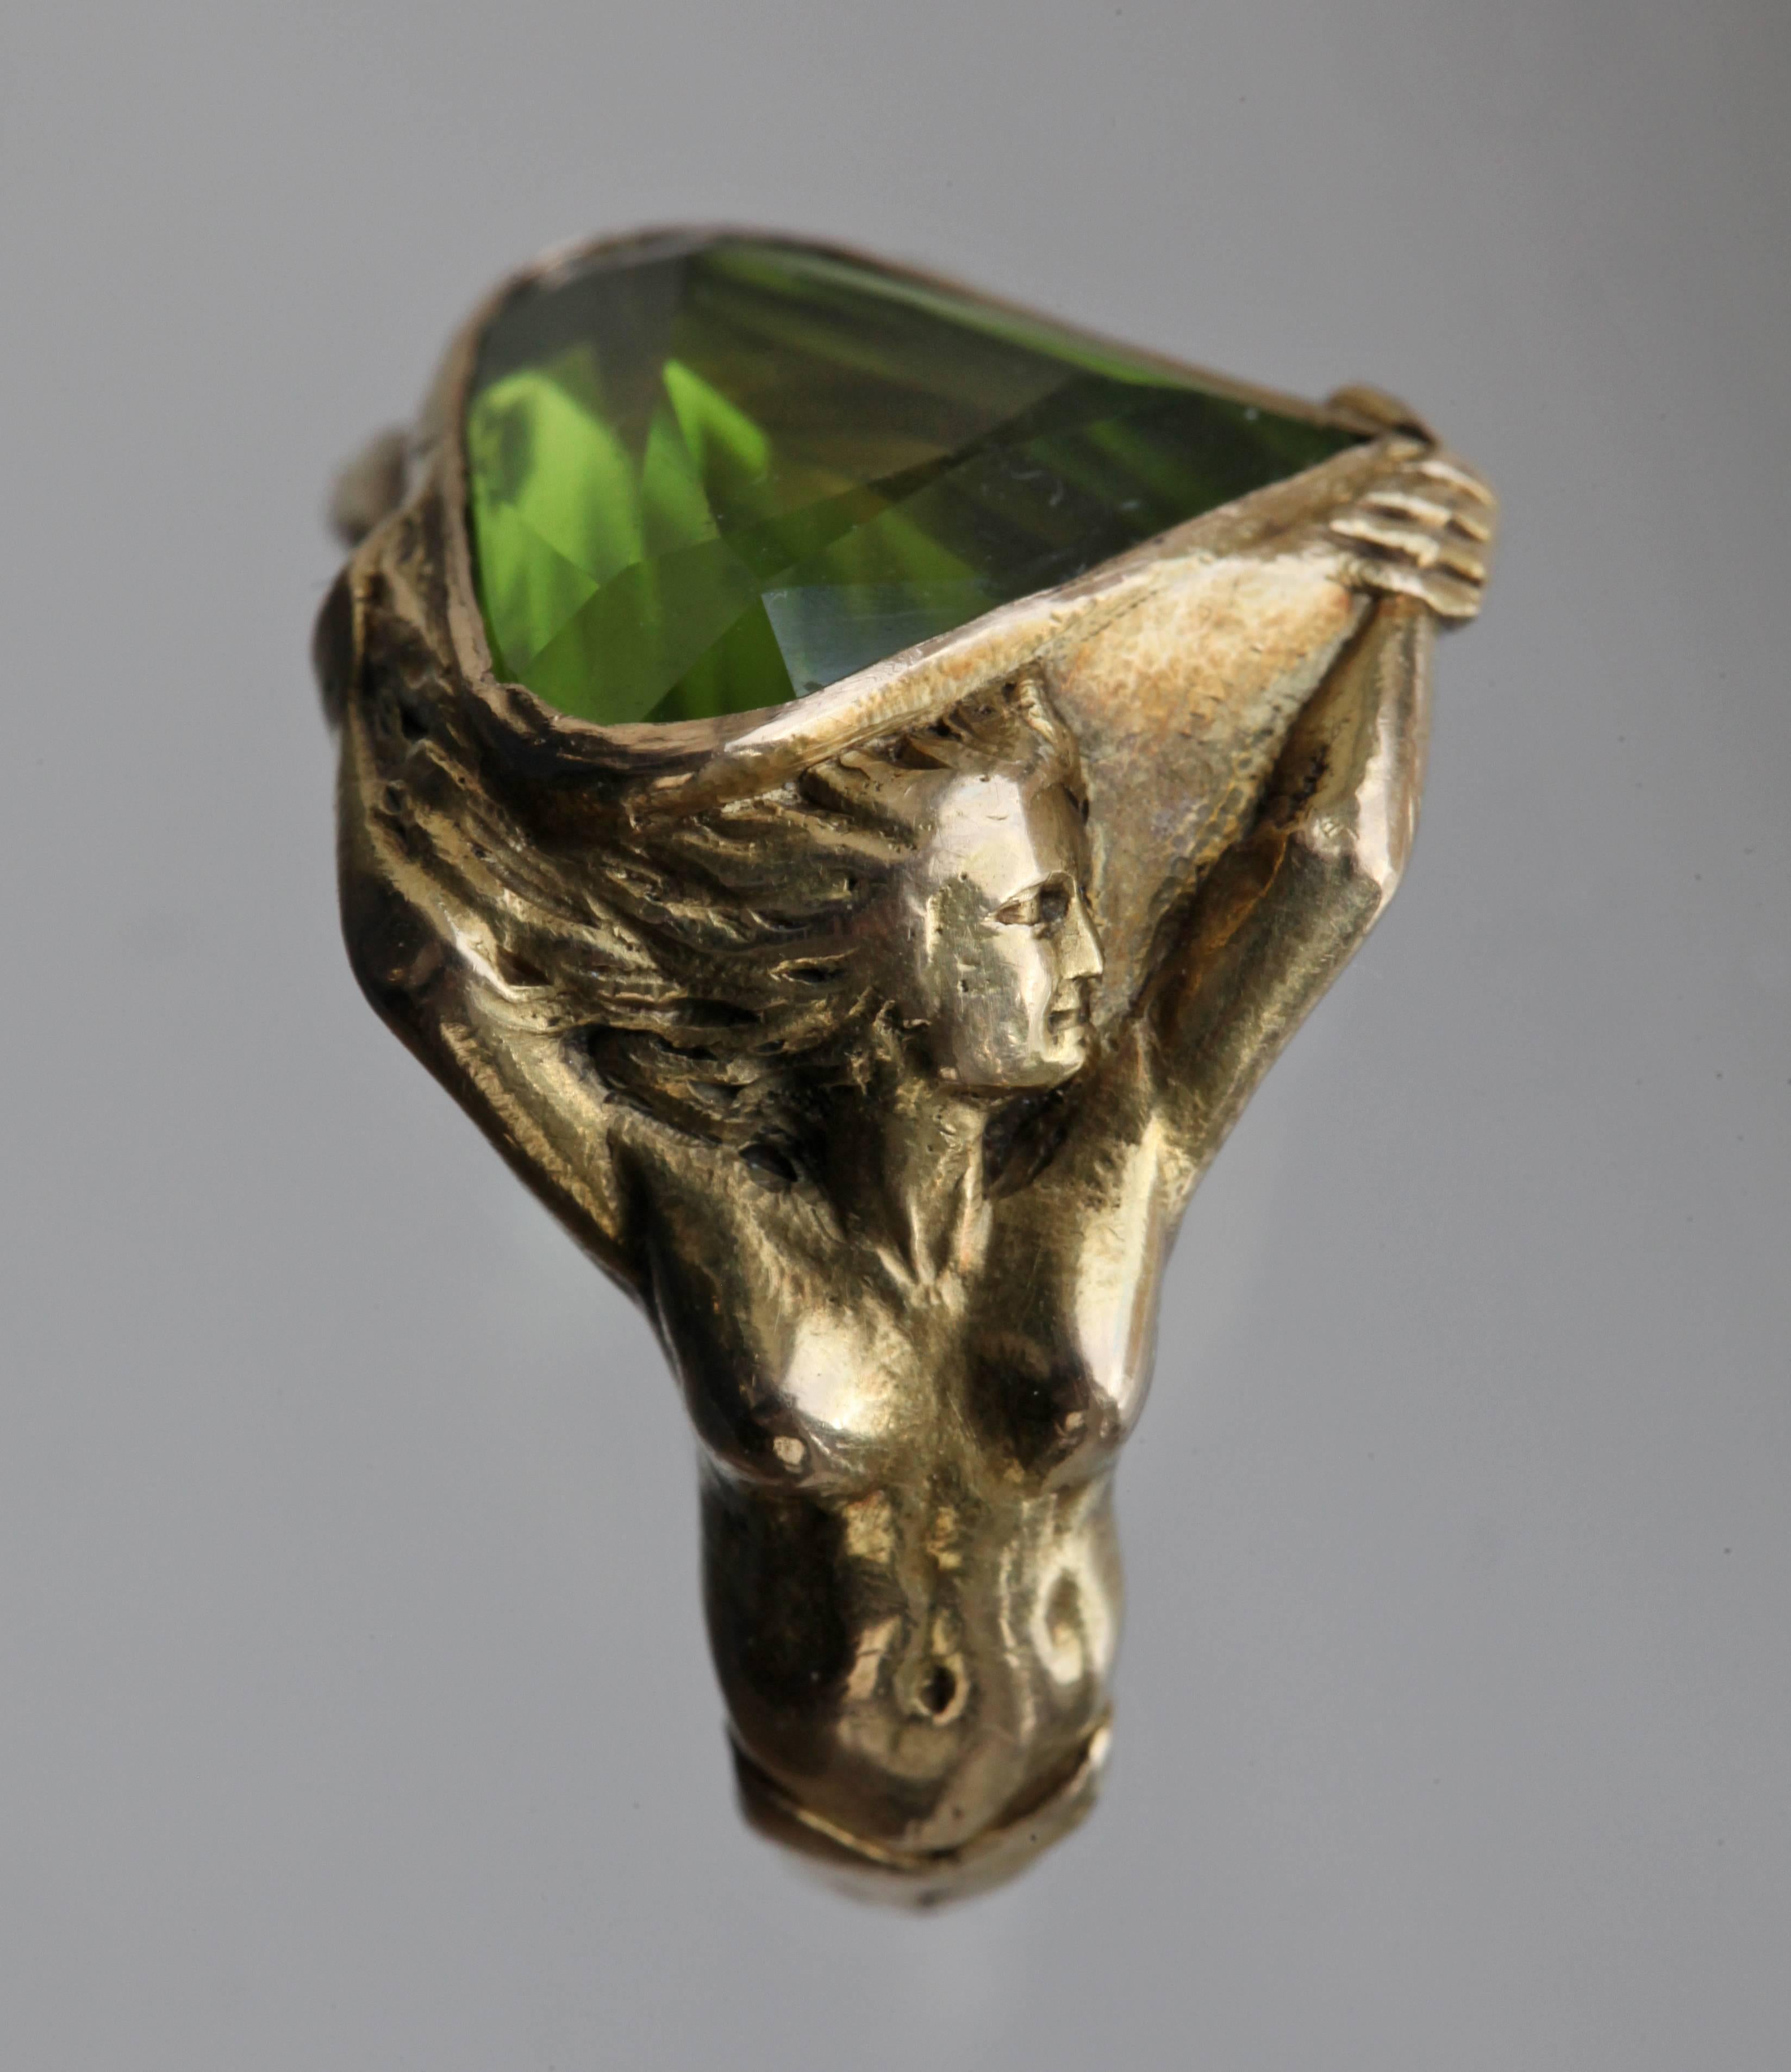 A wonderfully powerful erotic ring. The sculptural form portraying Adam & Eve clasping hands symbolizing original love. The ring shank resembles the belly of the serpent. The peridot has the colour of the forbidden fruit & the shape implies sexual